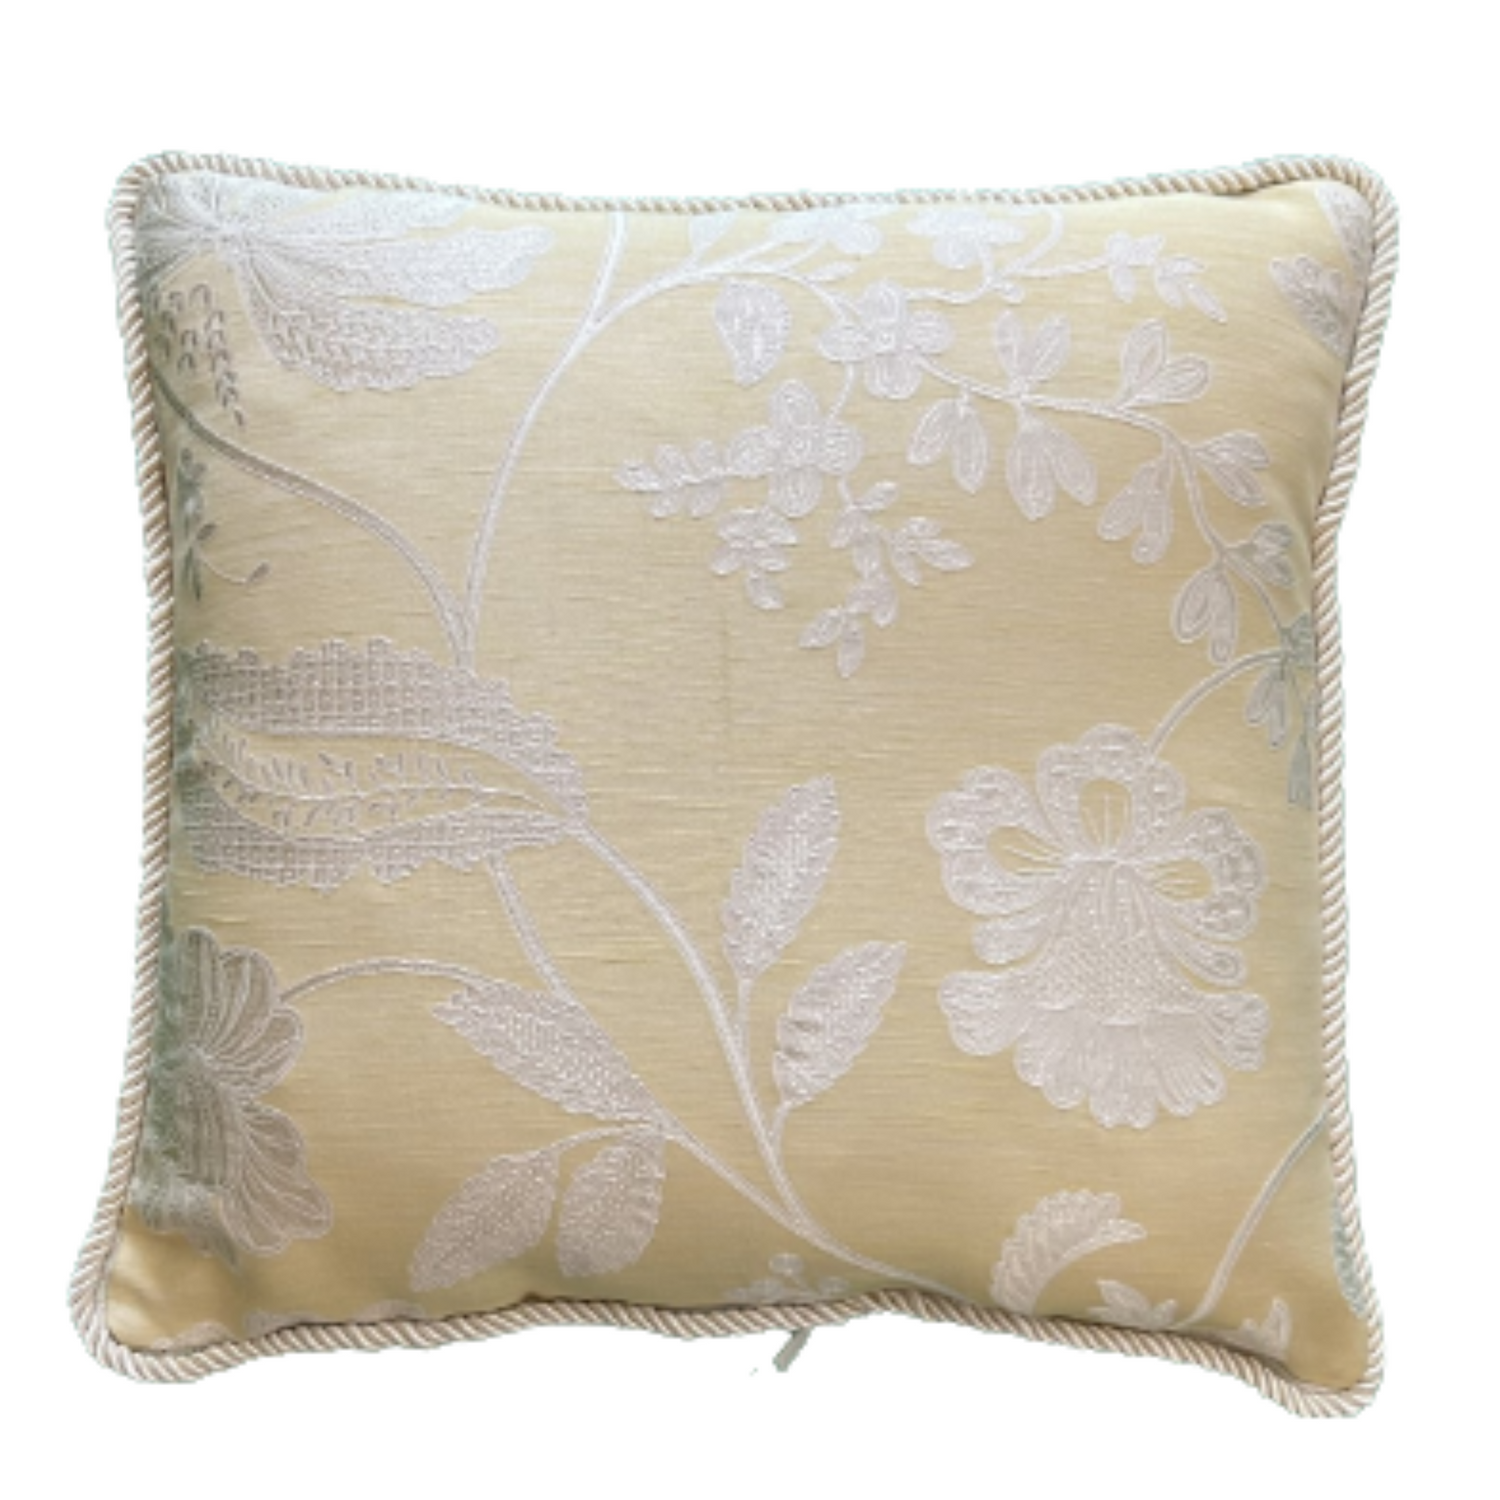 Rescued from Colefax & Fowler, Camille is a woven jacquard textile with alluringly intricate detailing. Fine tracery of silky white pearl embroidery outlines wildflowers, stems and leaves, creating a delicate effect of lacework and refined embellishment. The sophisticated loose design is well suited to the glamorous wool and silk ground in delicate pale mimosa yellow